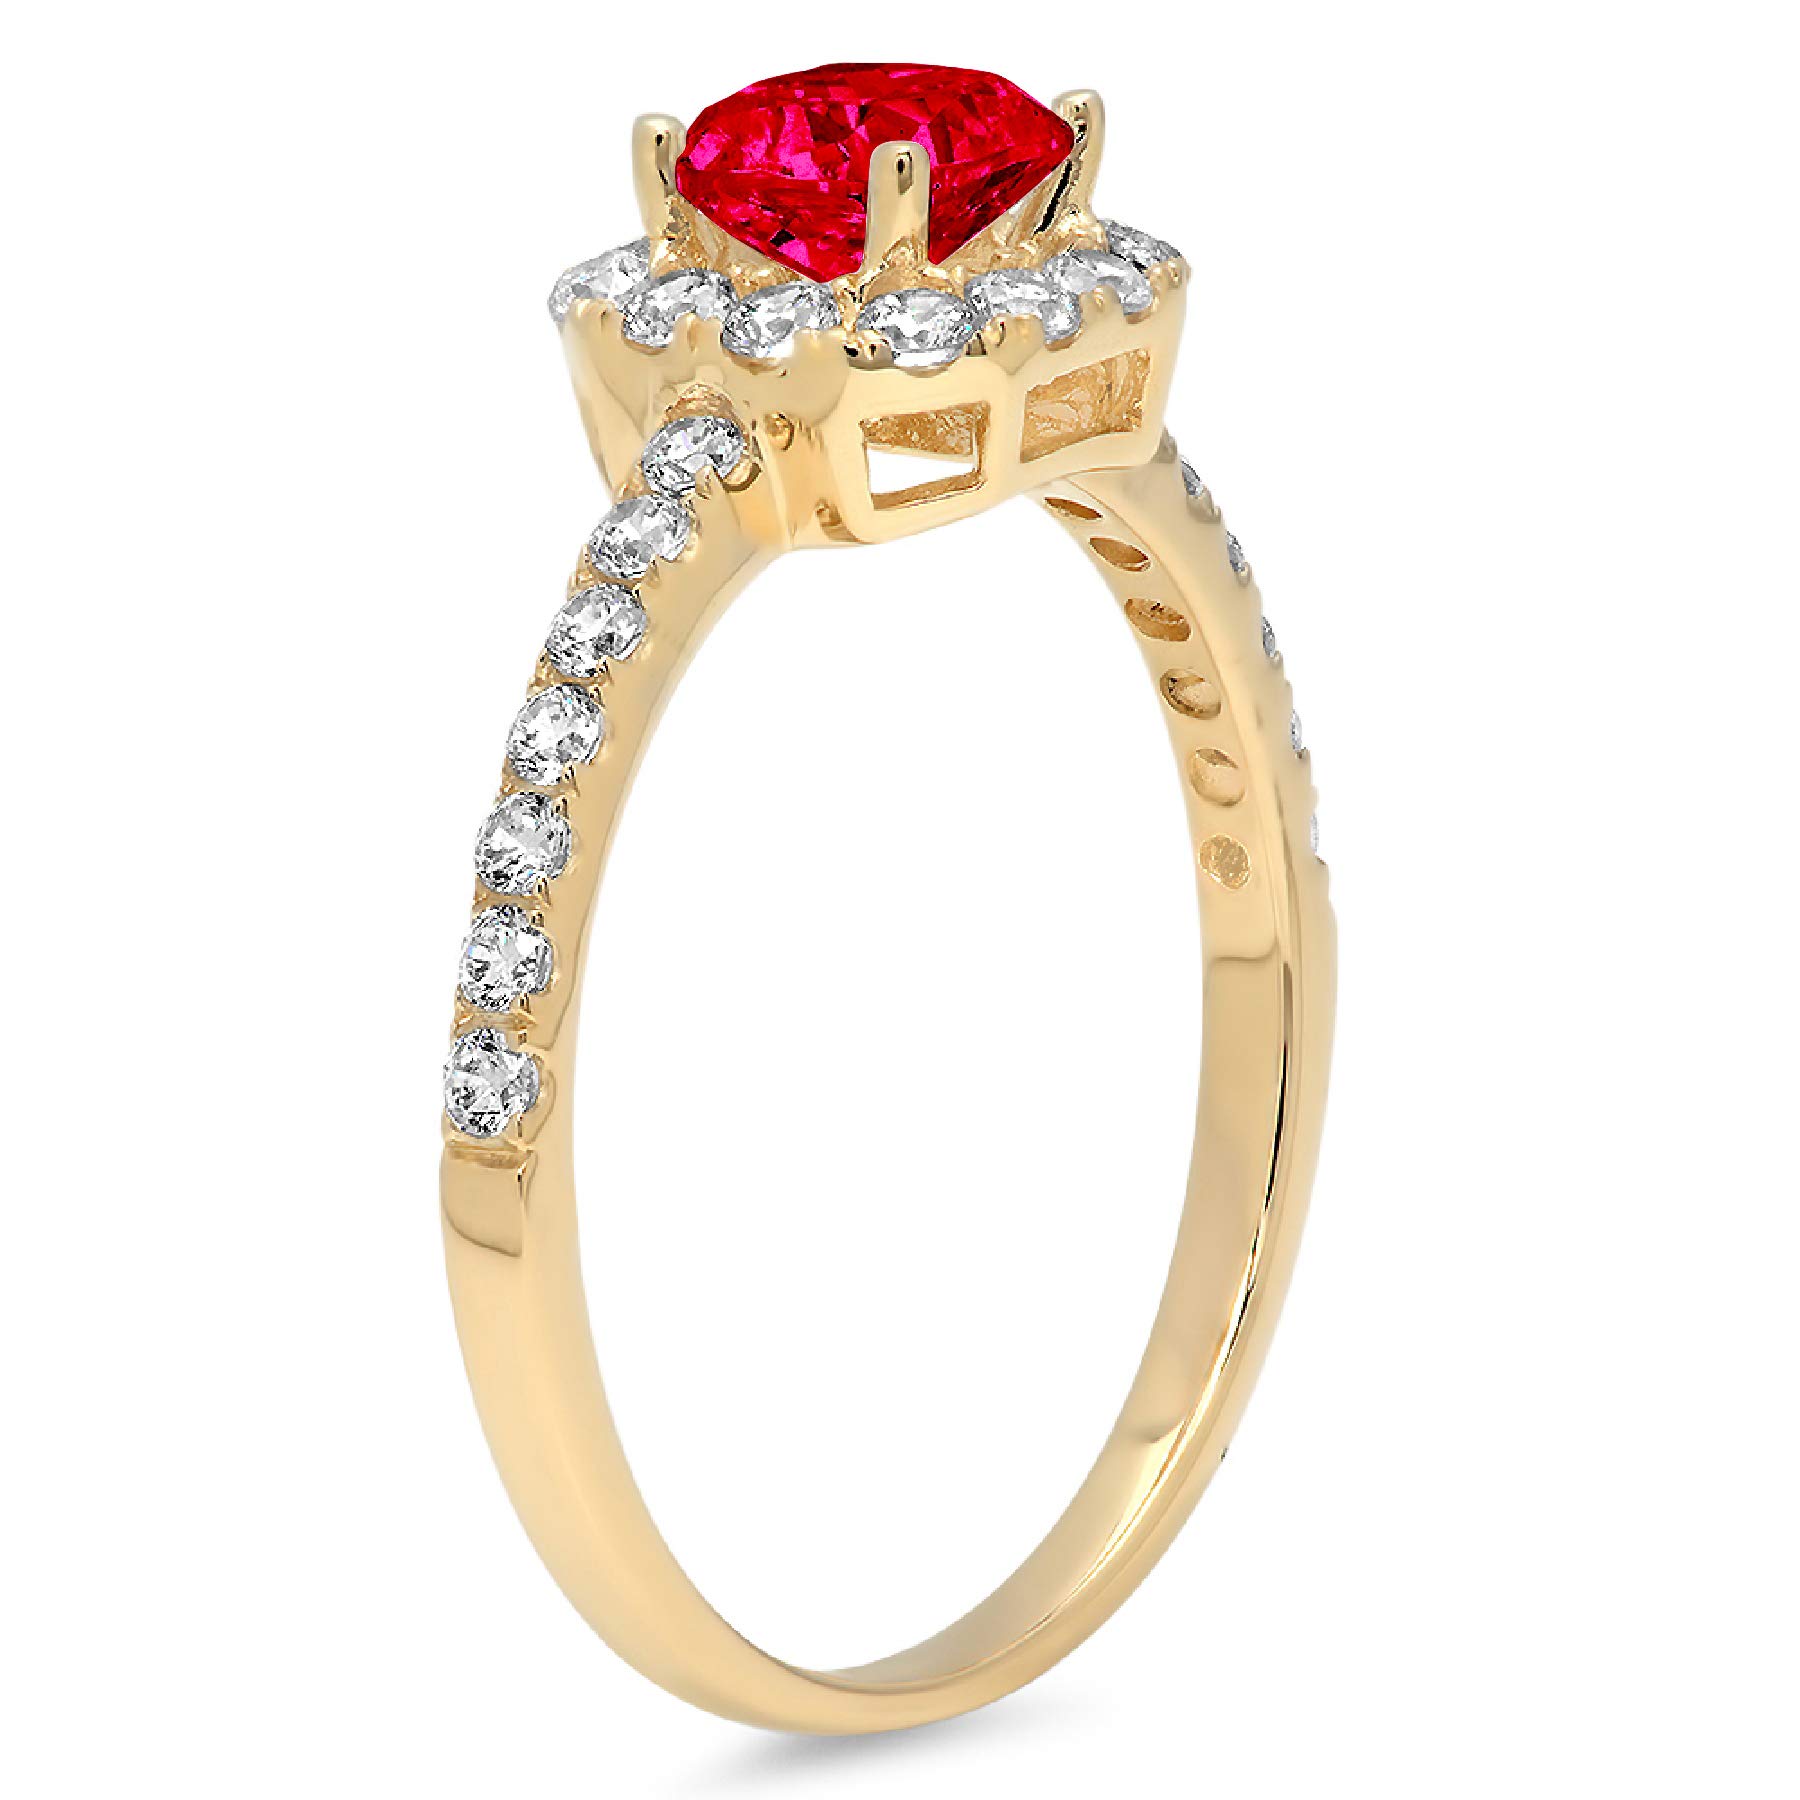 Clara Pucci 1 ct Brilliant Princess Cut Solitaire with accent Flawless Simulated CZ Red Ruby VVS1 Designer Modern Statement Ring Solid 14k Yellow Gold